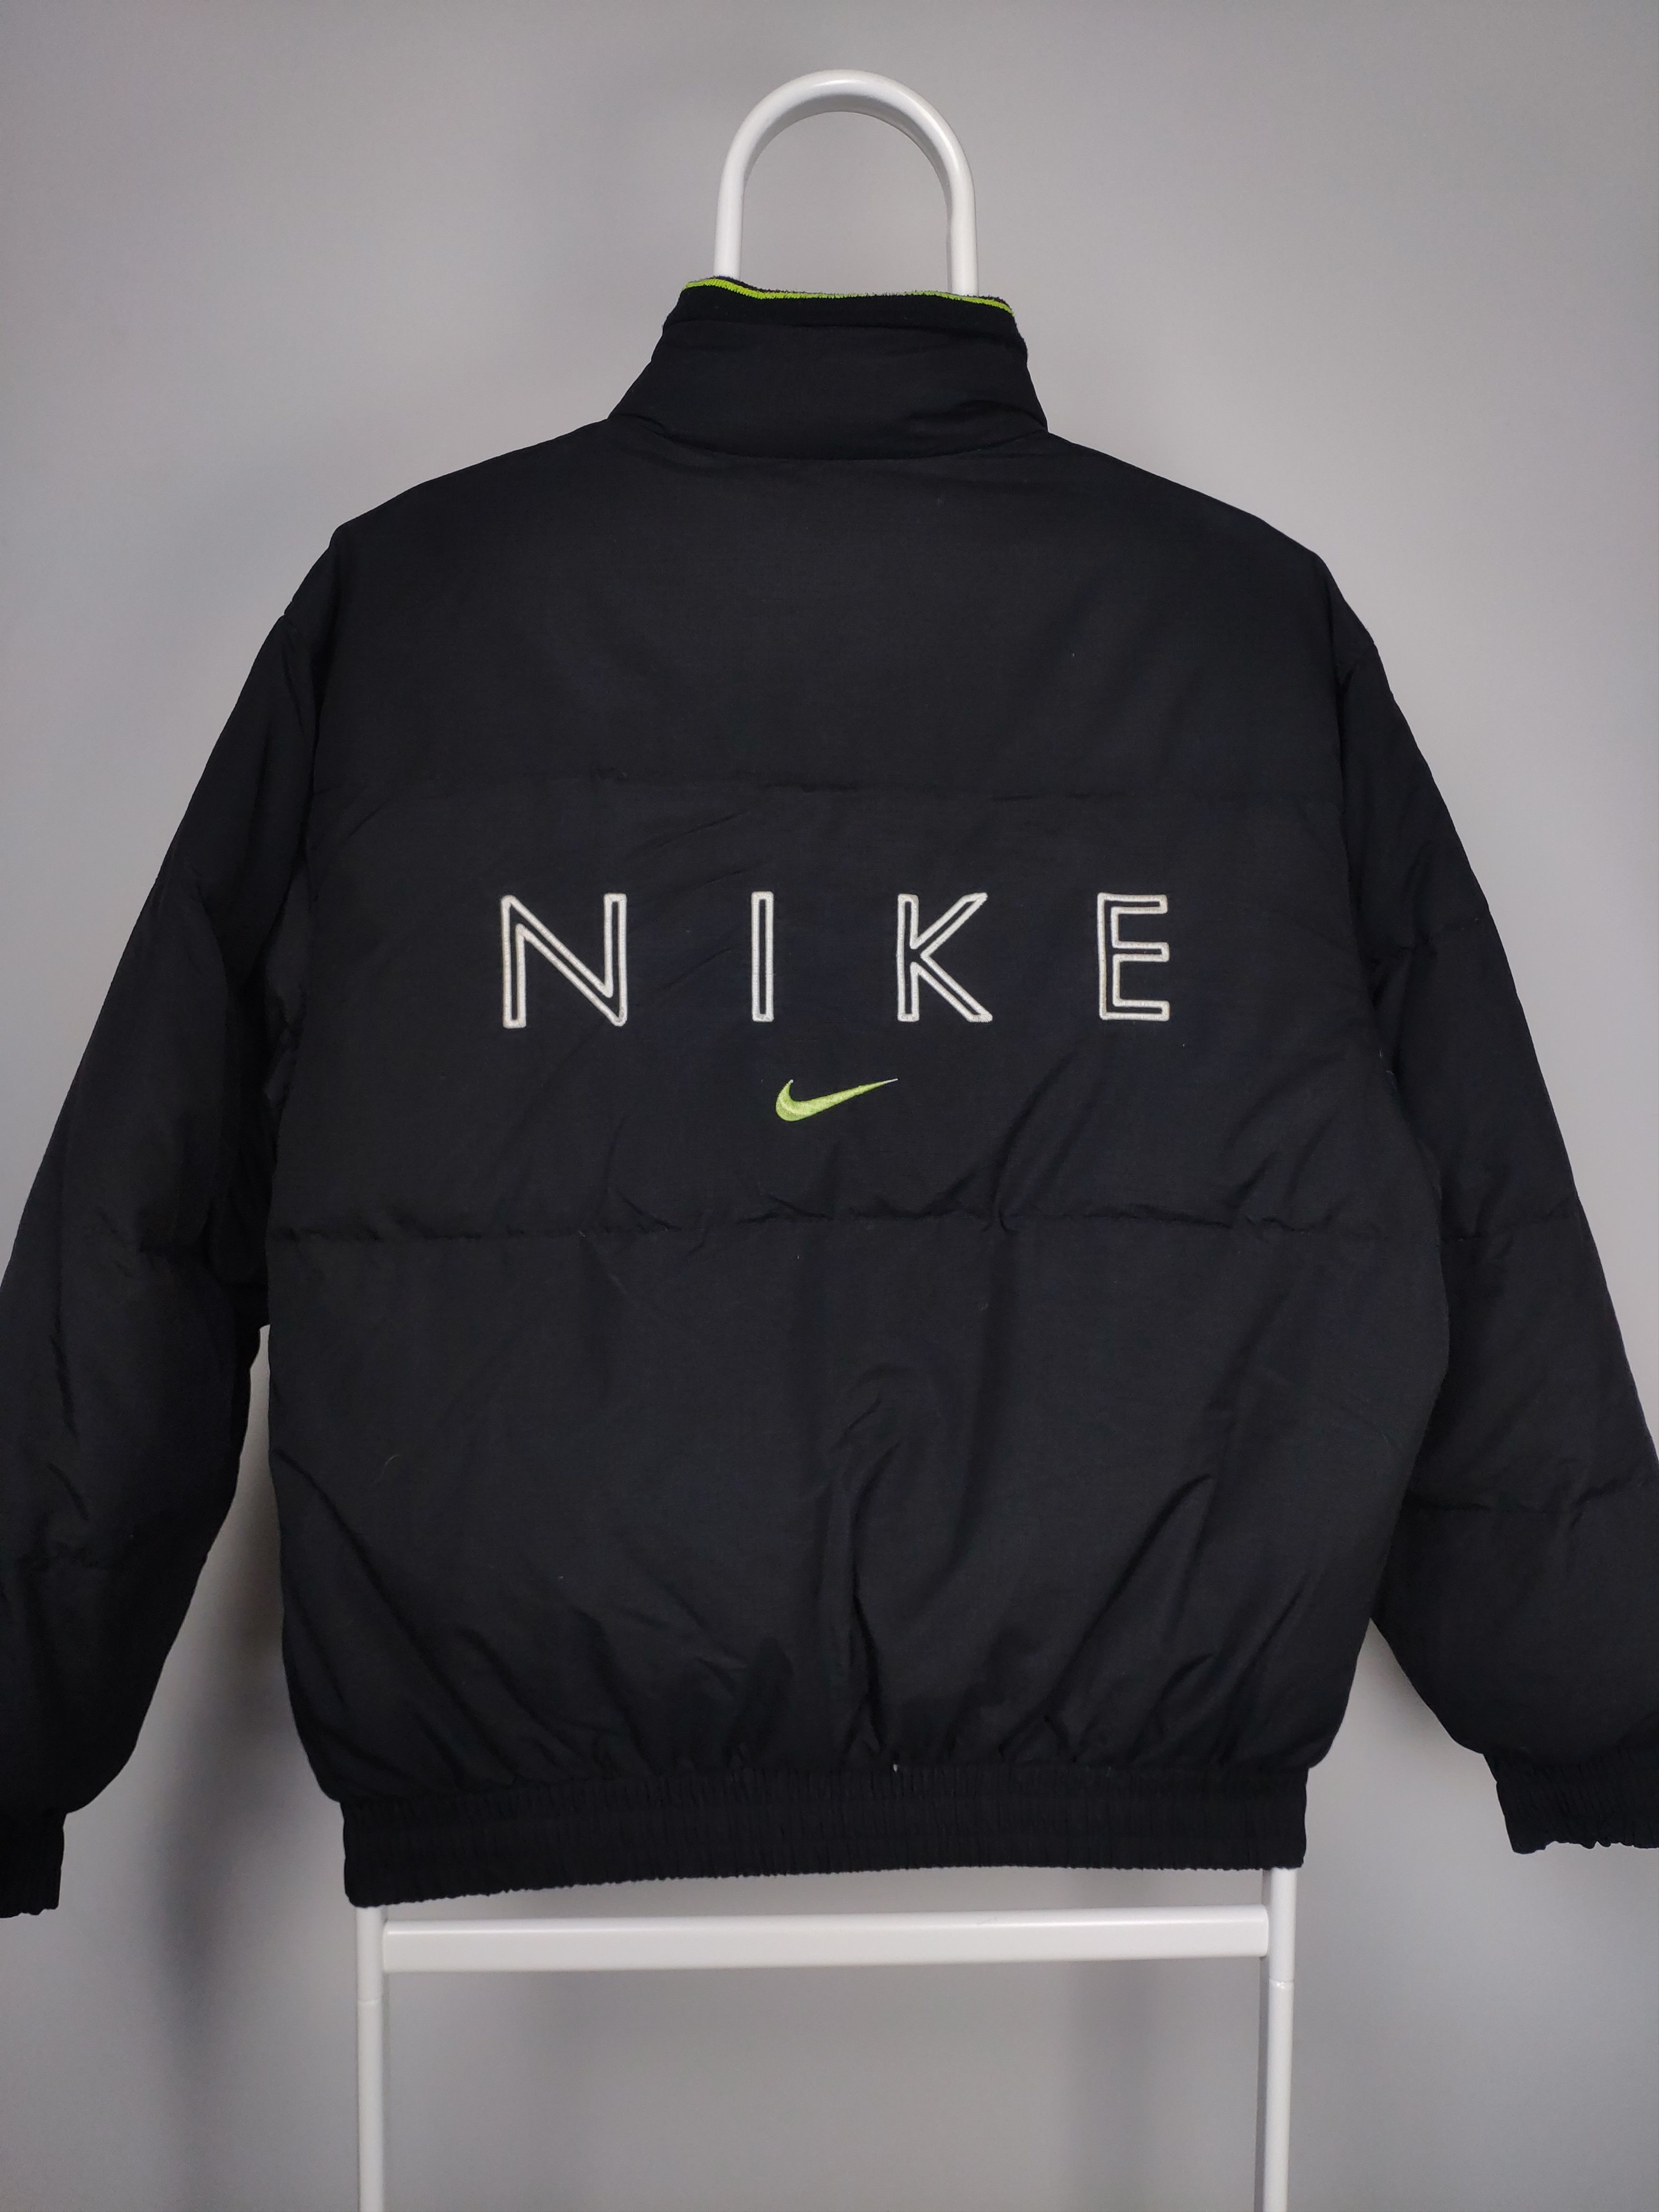 Nike Nike vintage spellout puffer jacket 90s rare black neon | Grailed